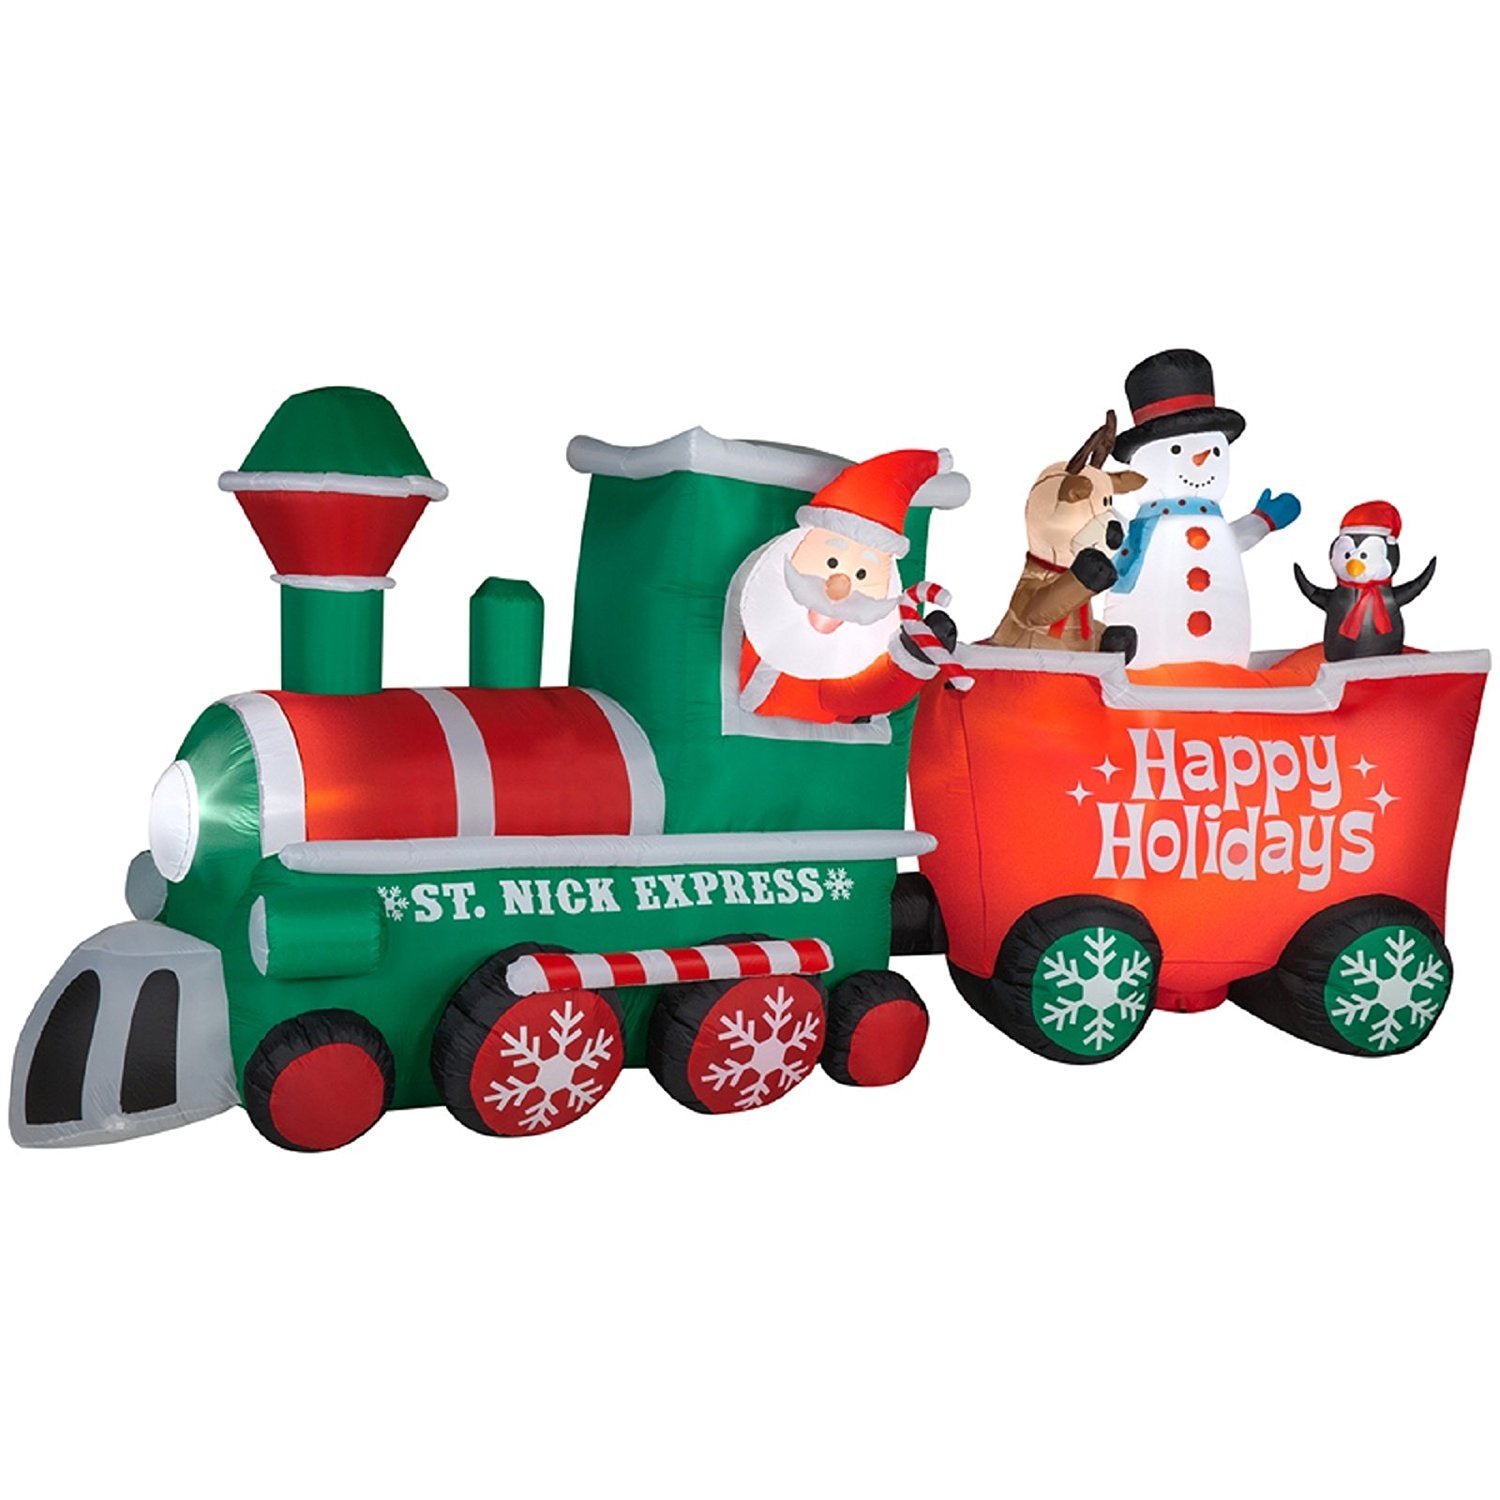 15.5 FT Airblown St. Nick Express Holiday Train with Conductor